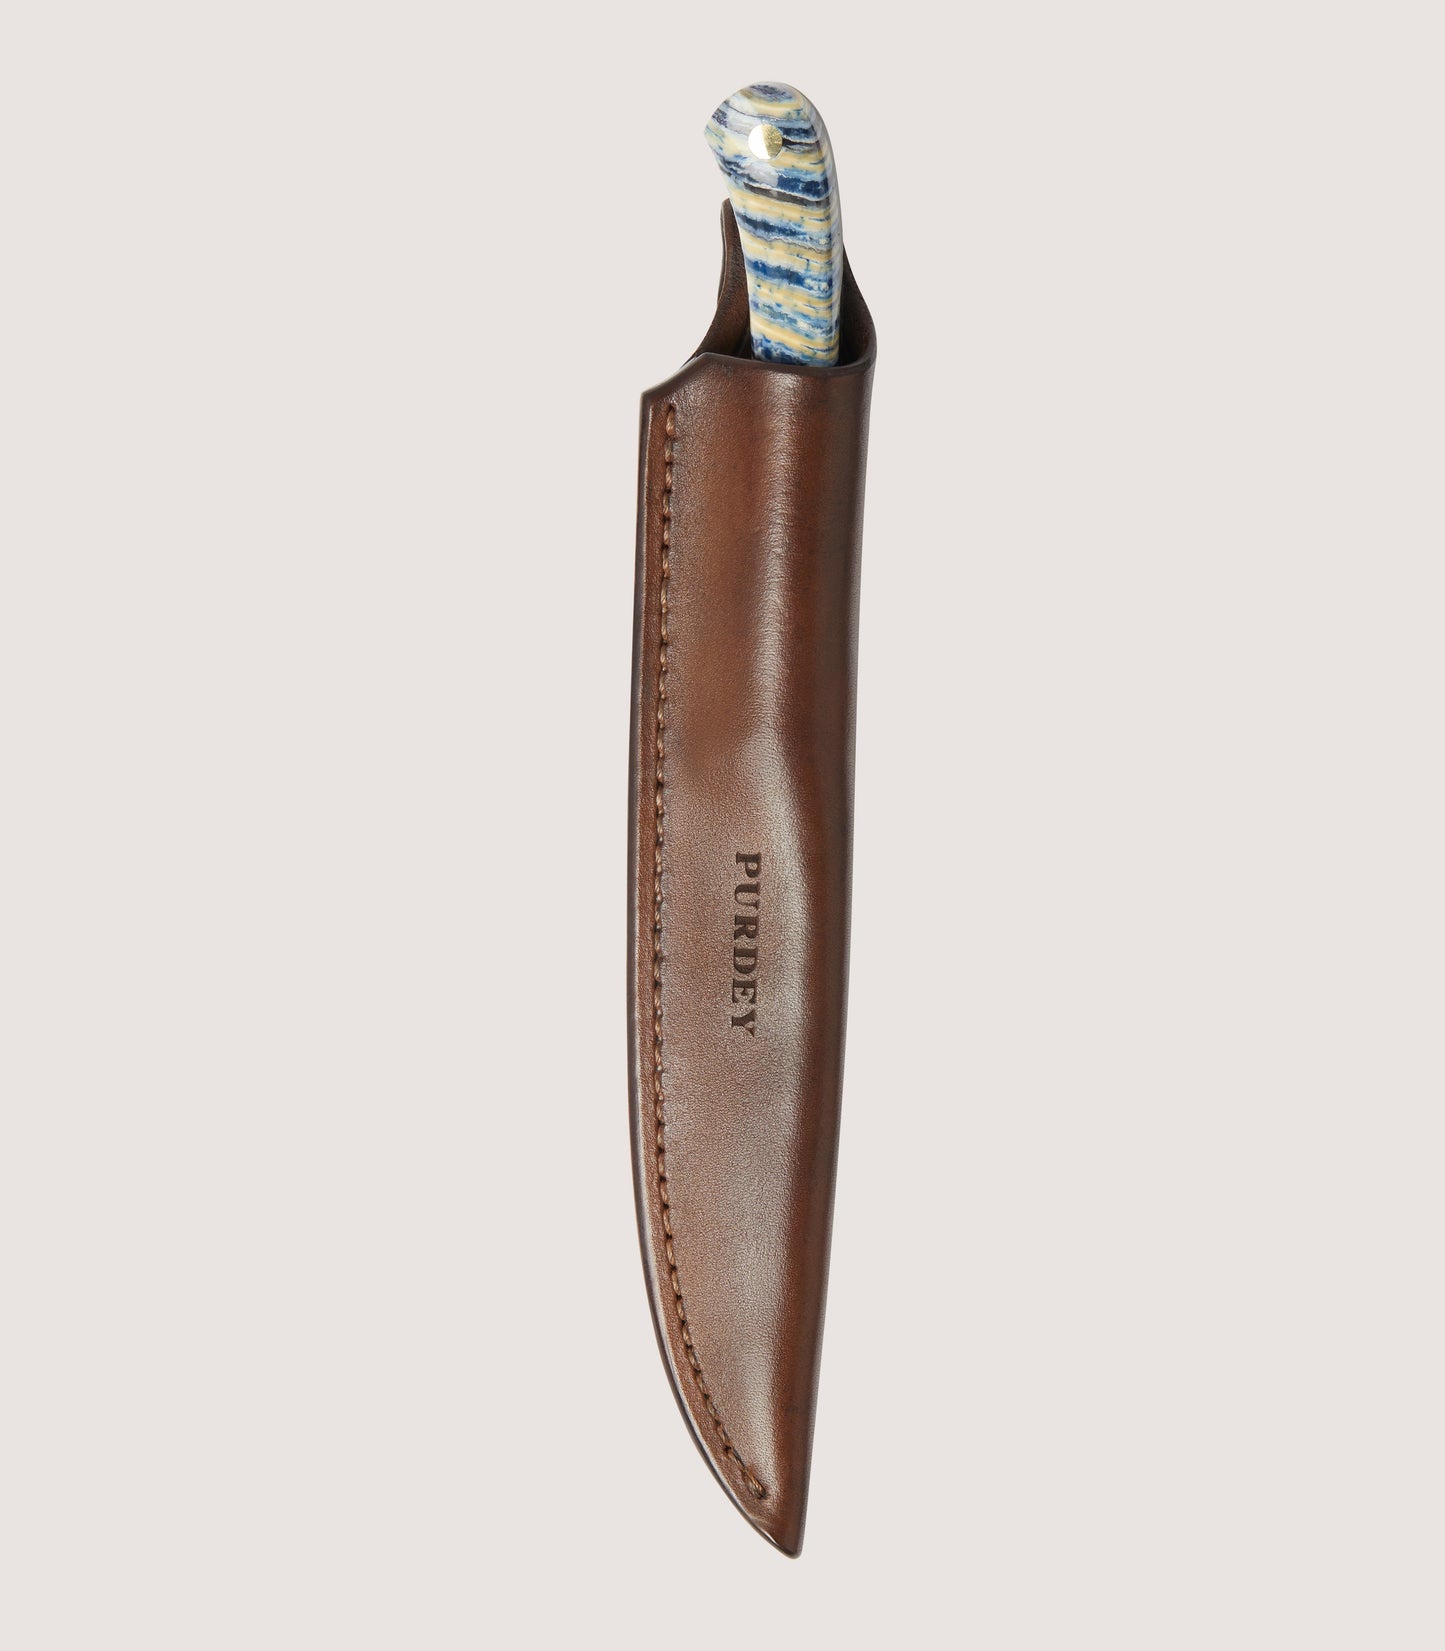 The Steel Sika Special Edition Field Knife